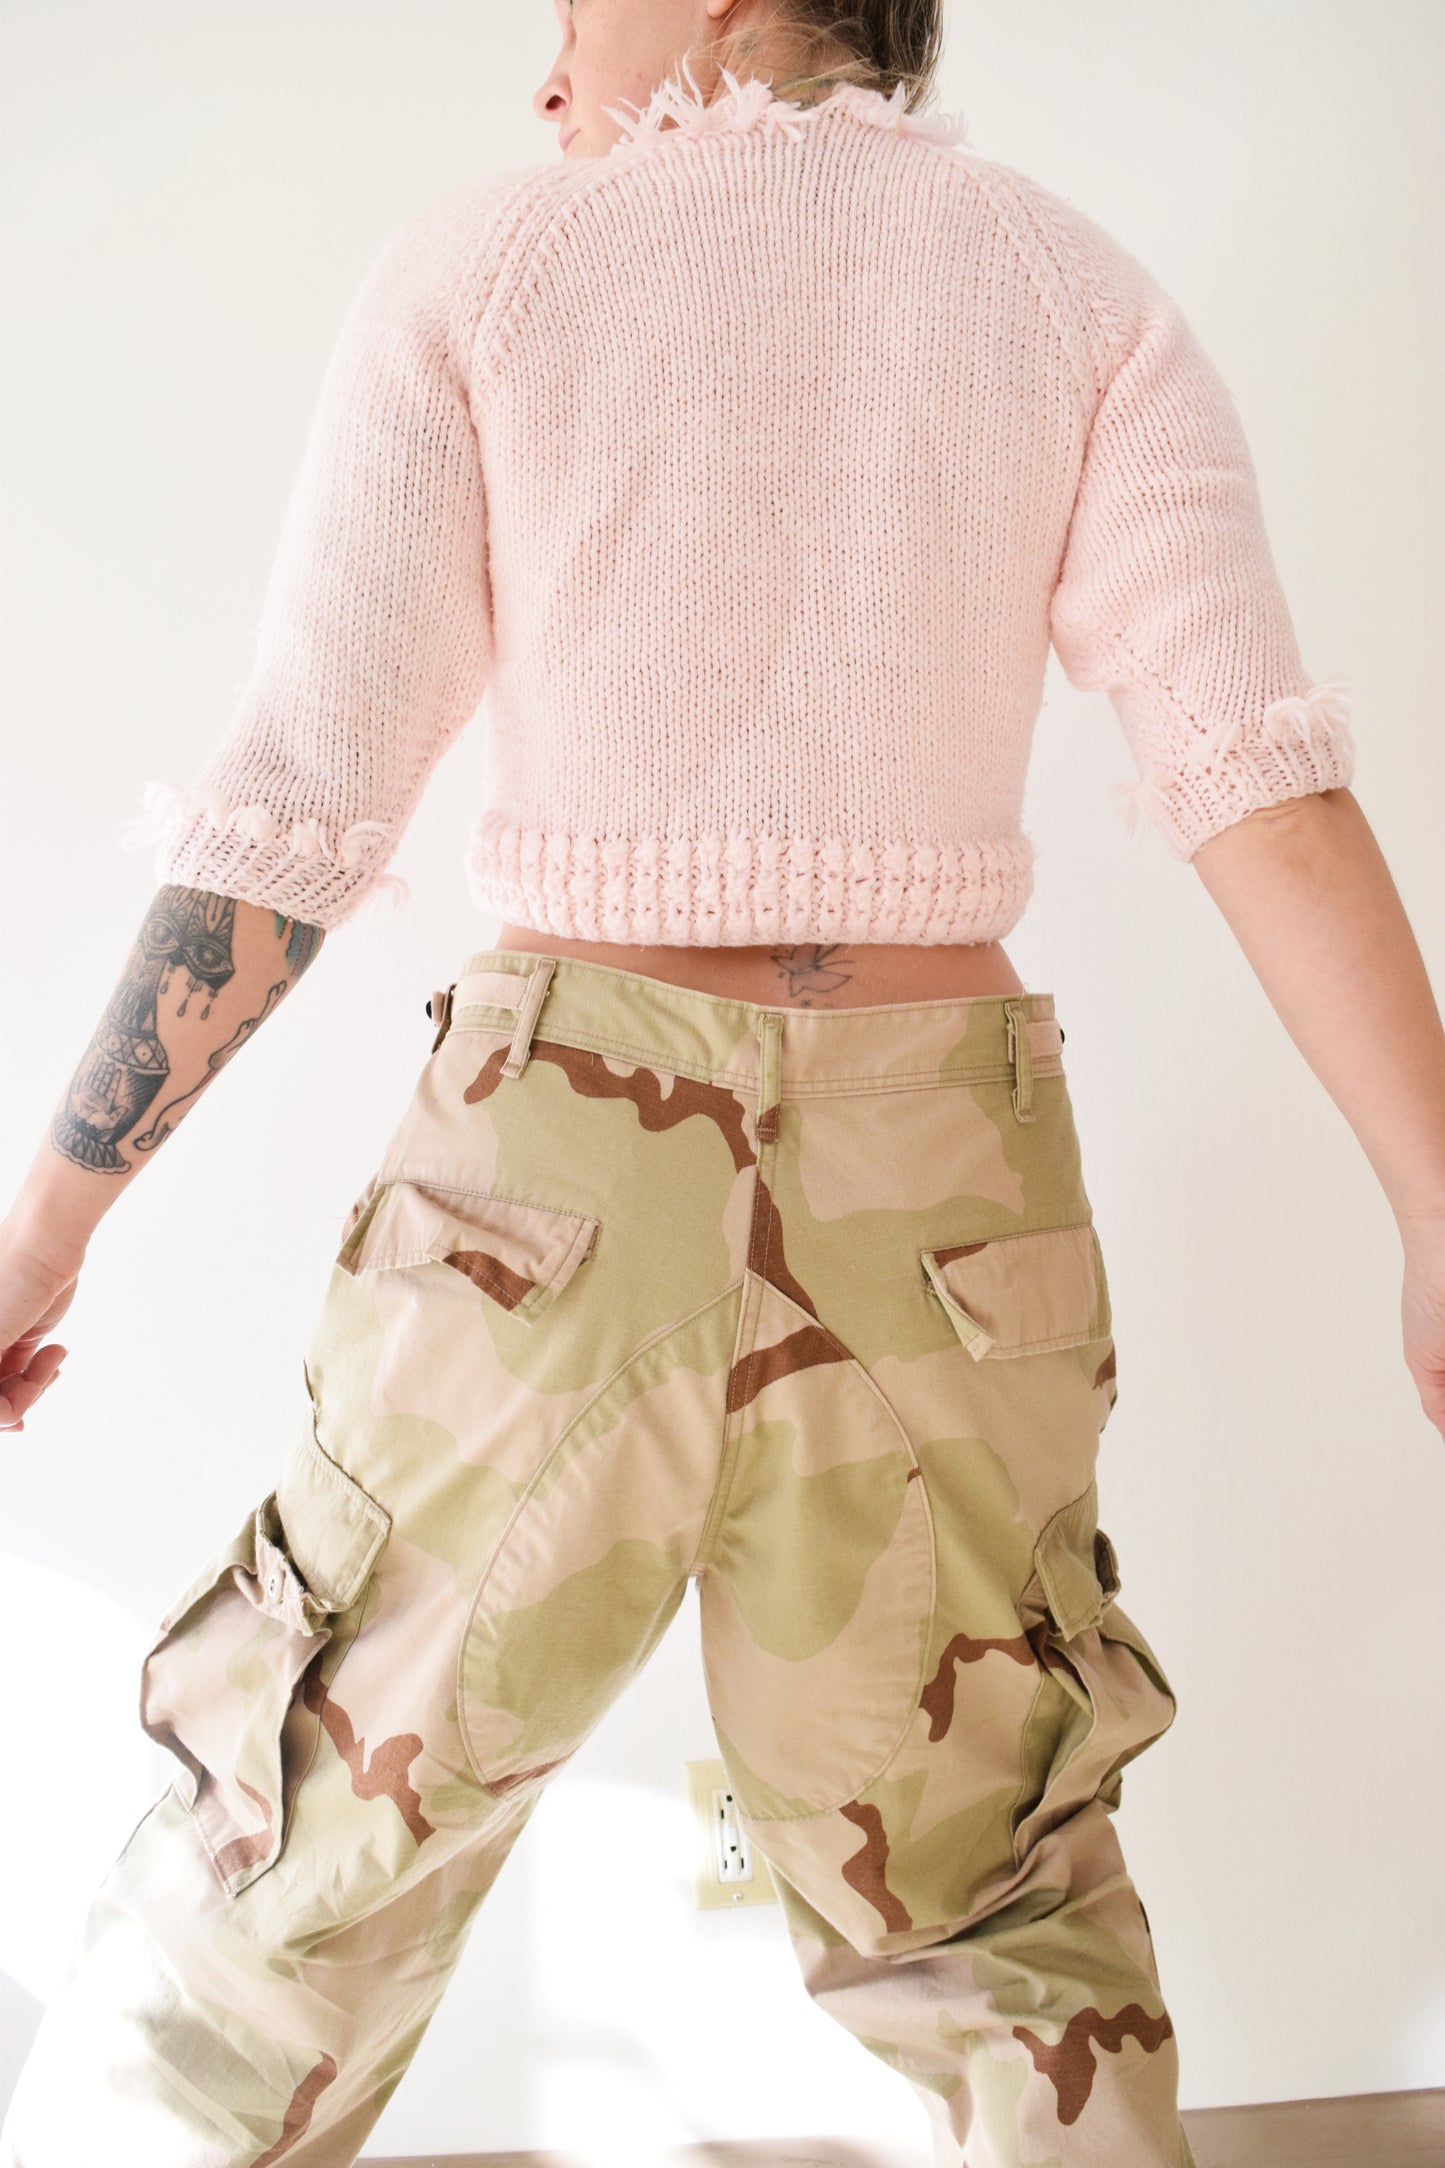 60s PALE ARMY FATIGUES - 31-35"